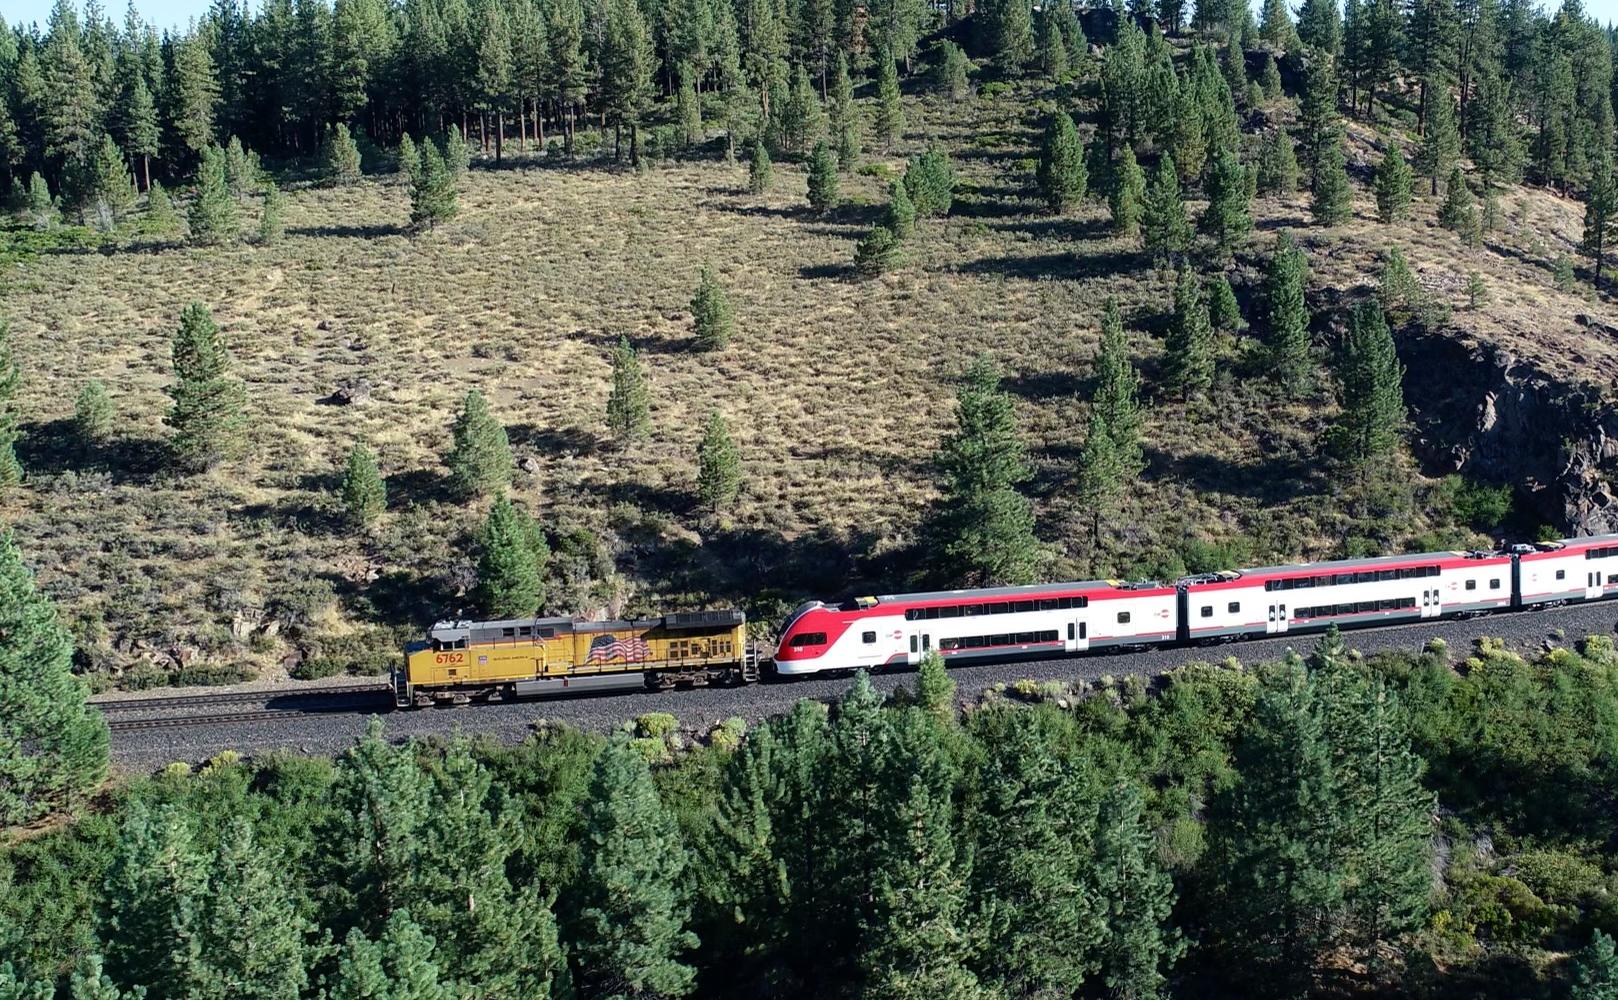 Caltrain electric trainsets being pulled by a locomotive through a scenic forest